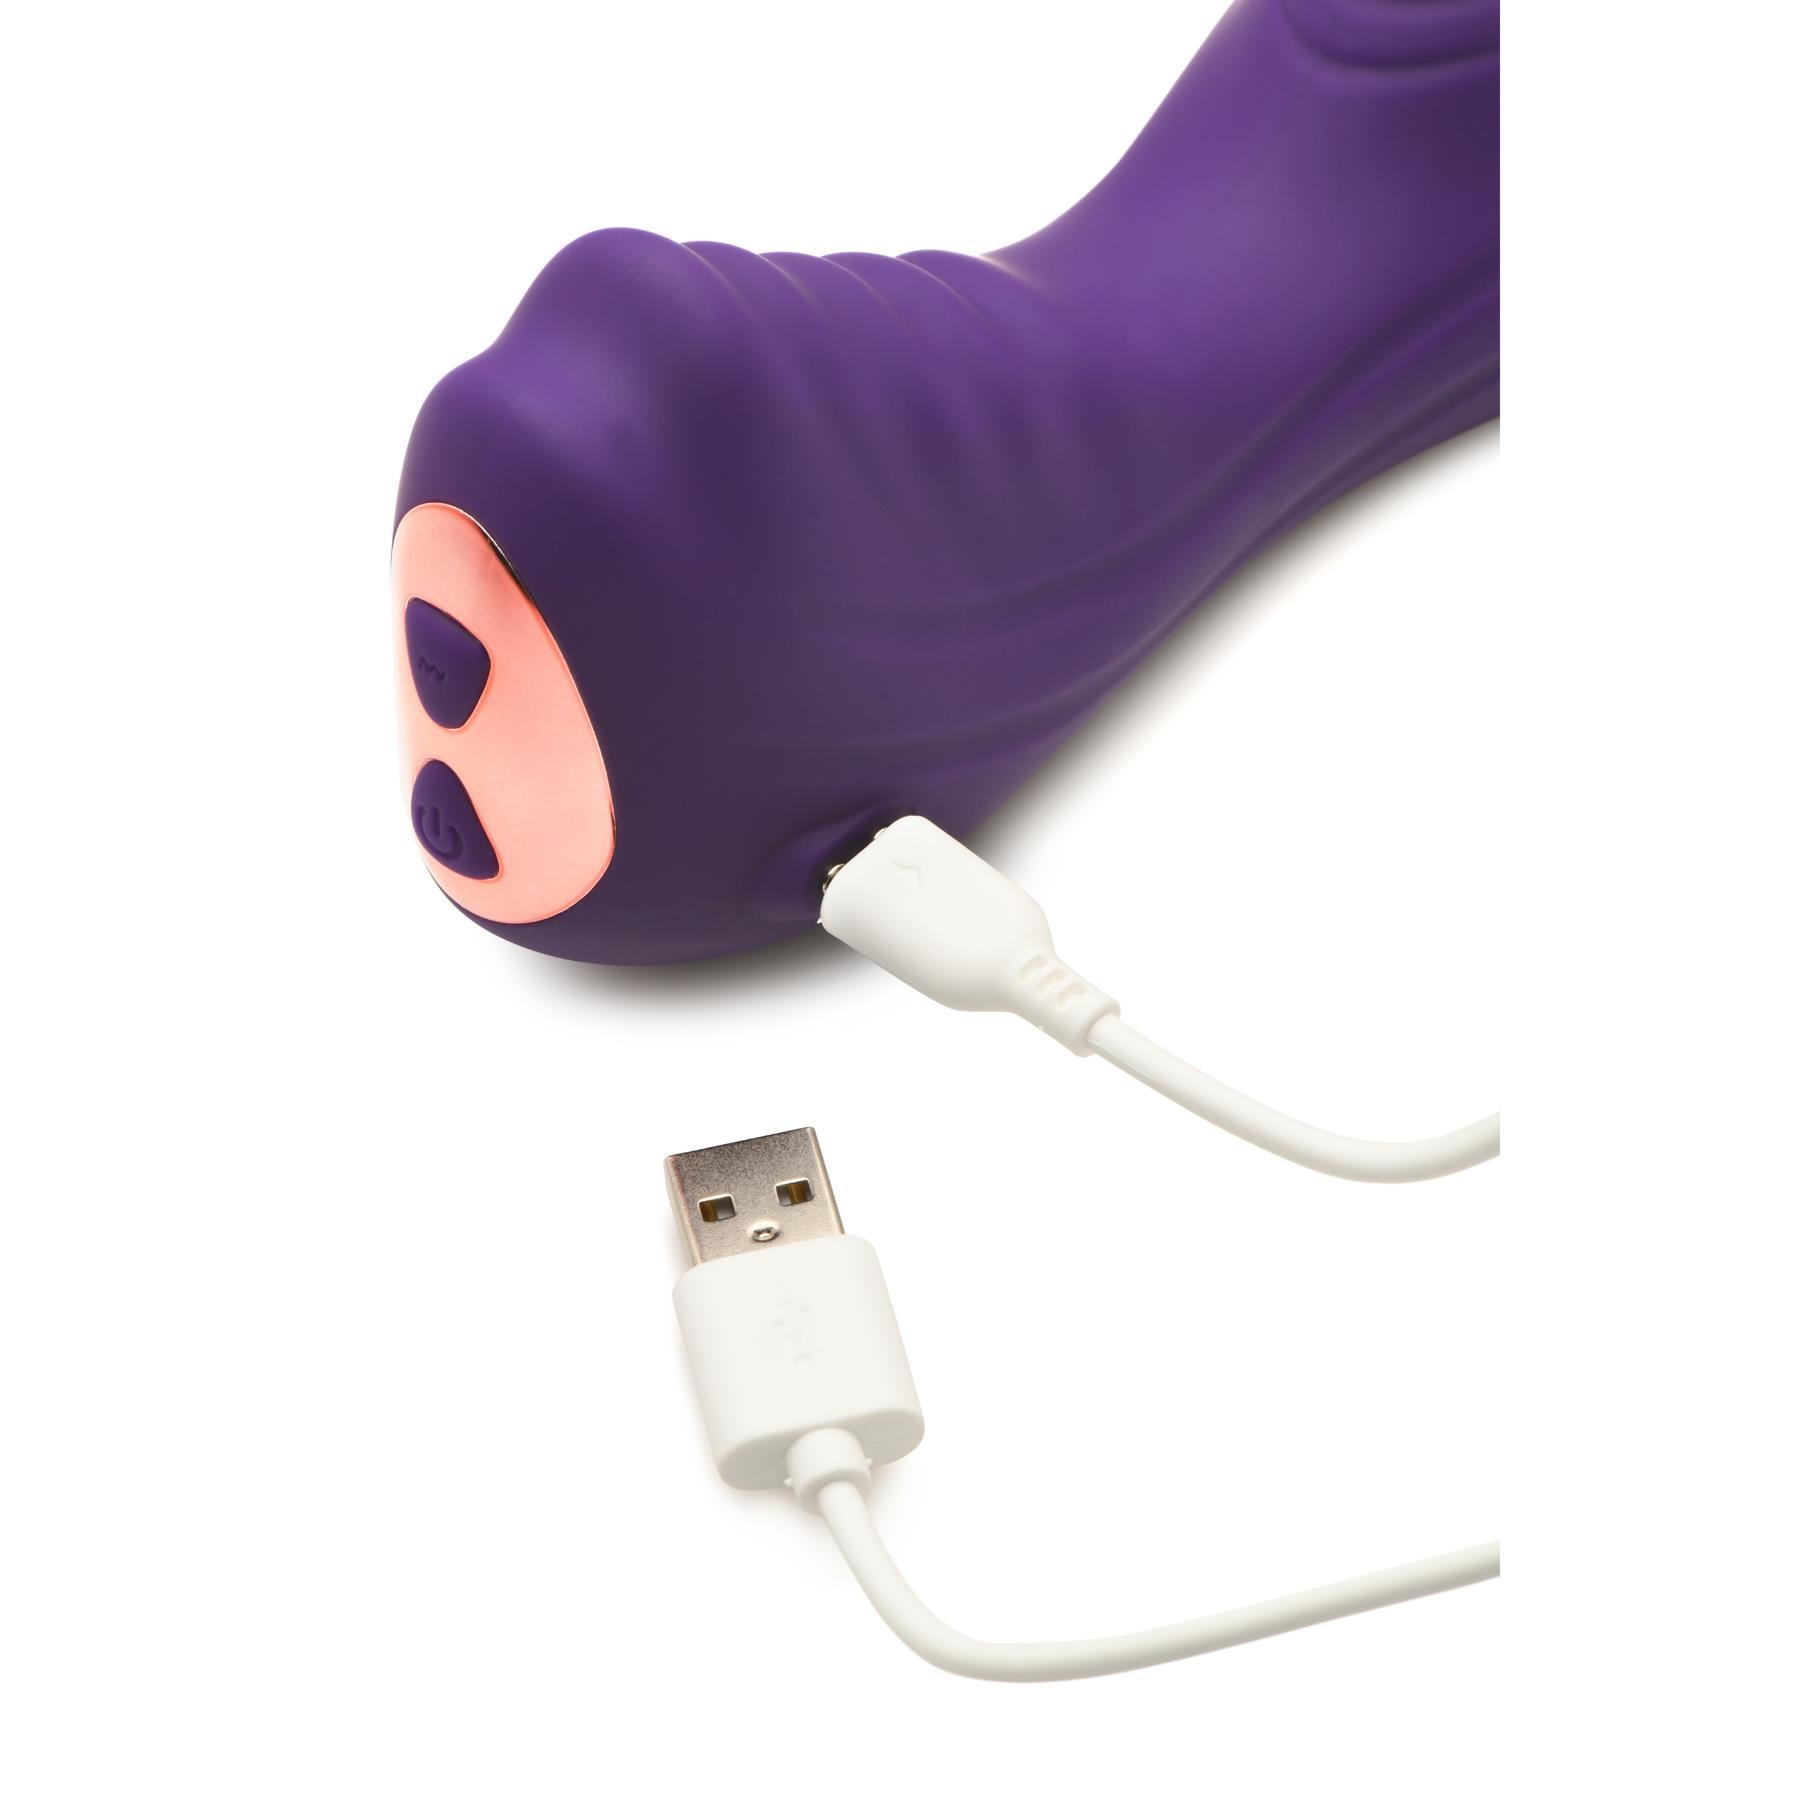 INMI Ride N' Grind Vibrating Sex Grinder - Product Showing Where charging Cable is Placed